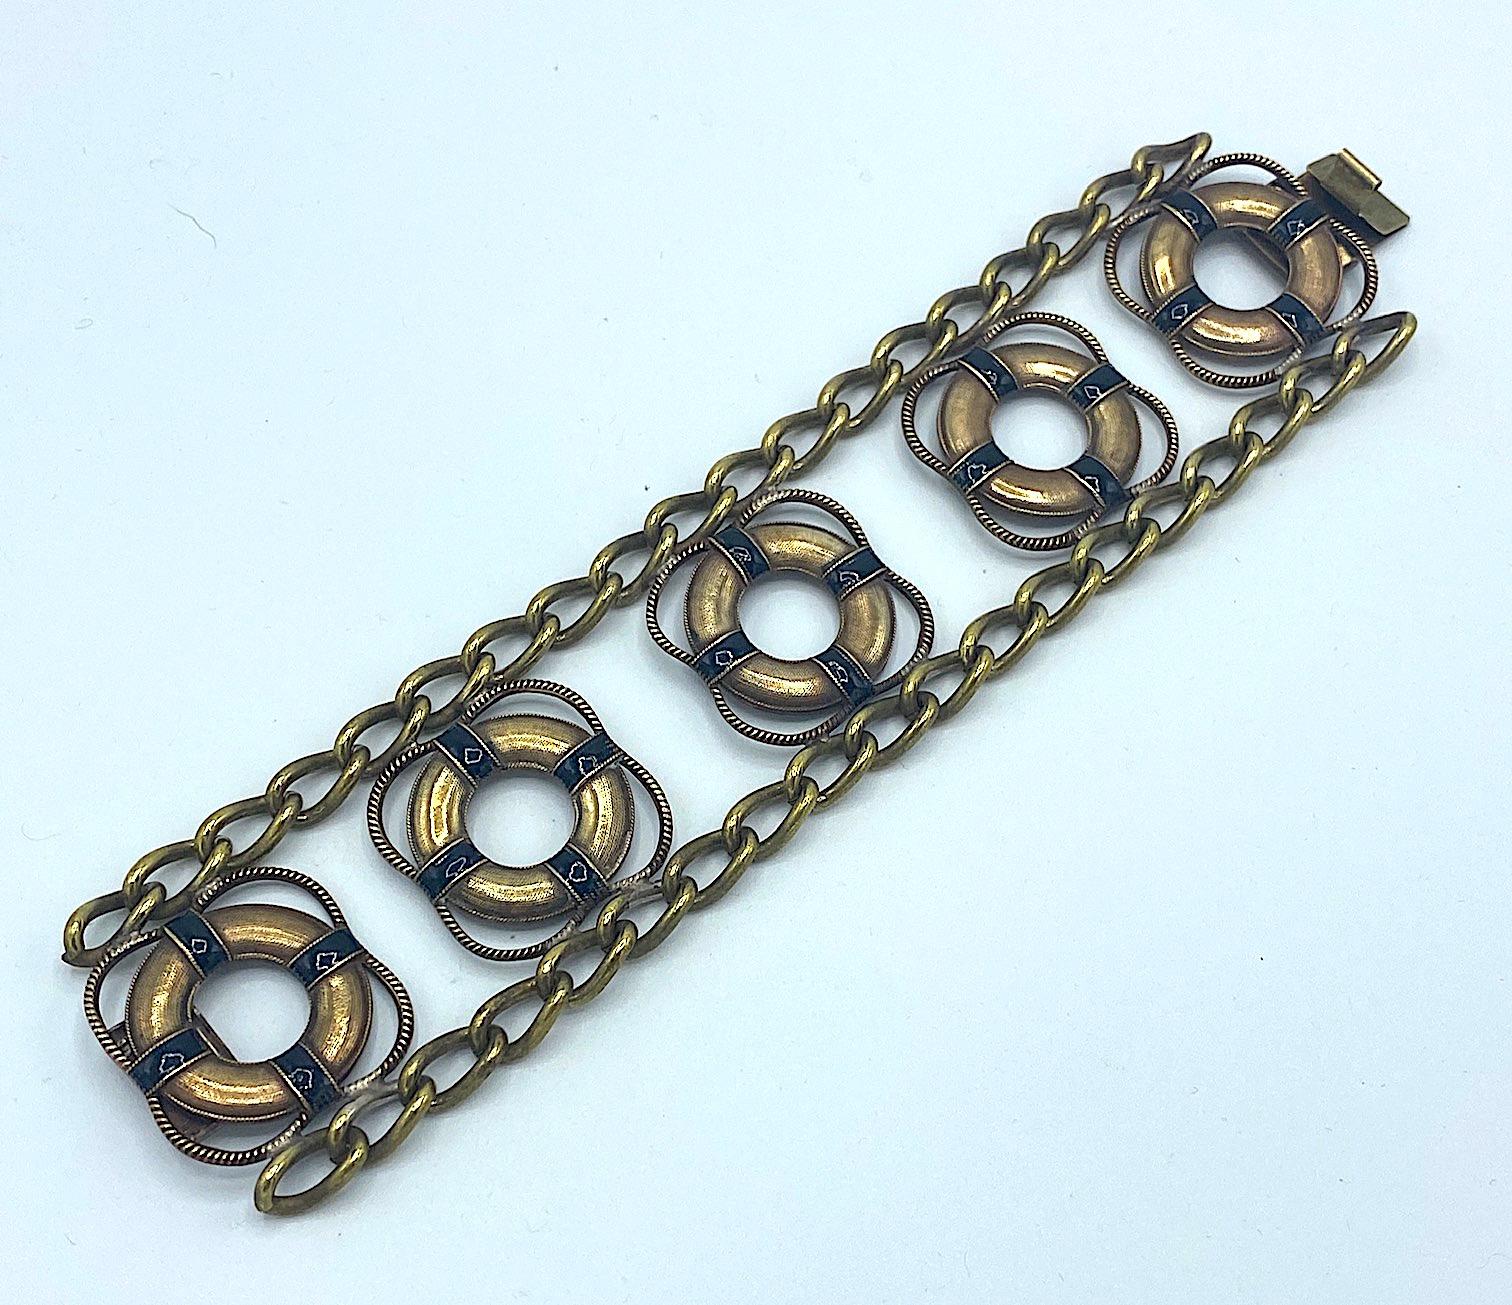 A very unusual and rare boating theme English bracelet in gold plate on brass with black enamel and dating from the late 1930s to early 1940s. The bracelet is large measuring a full 1.75 inches wide and 8 inches long including the tongue of the push